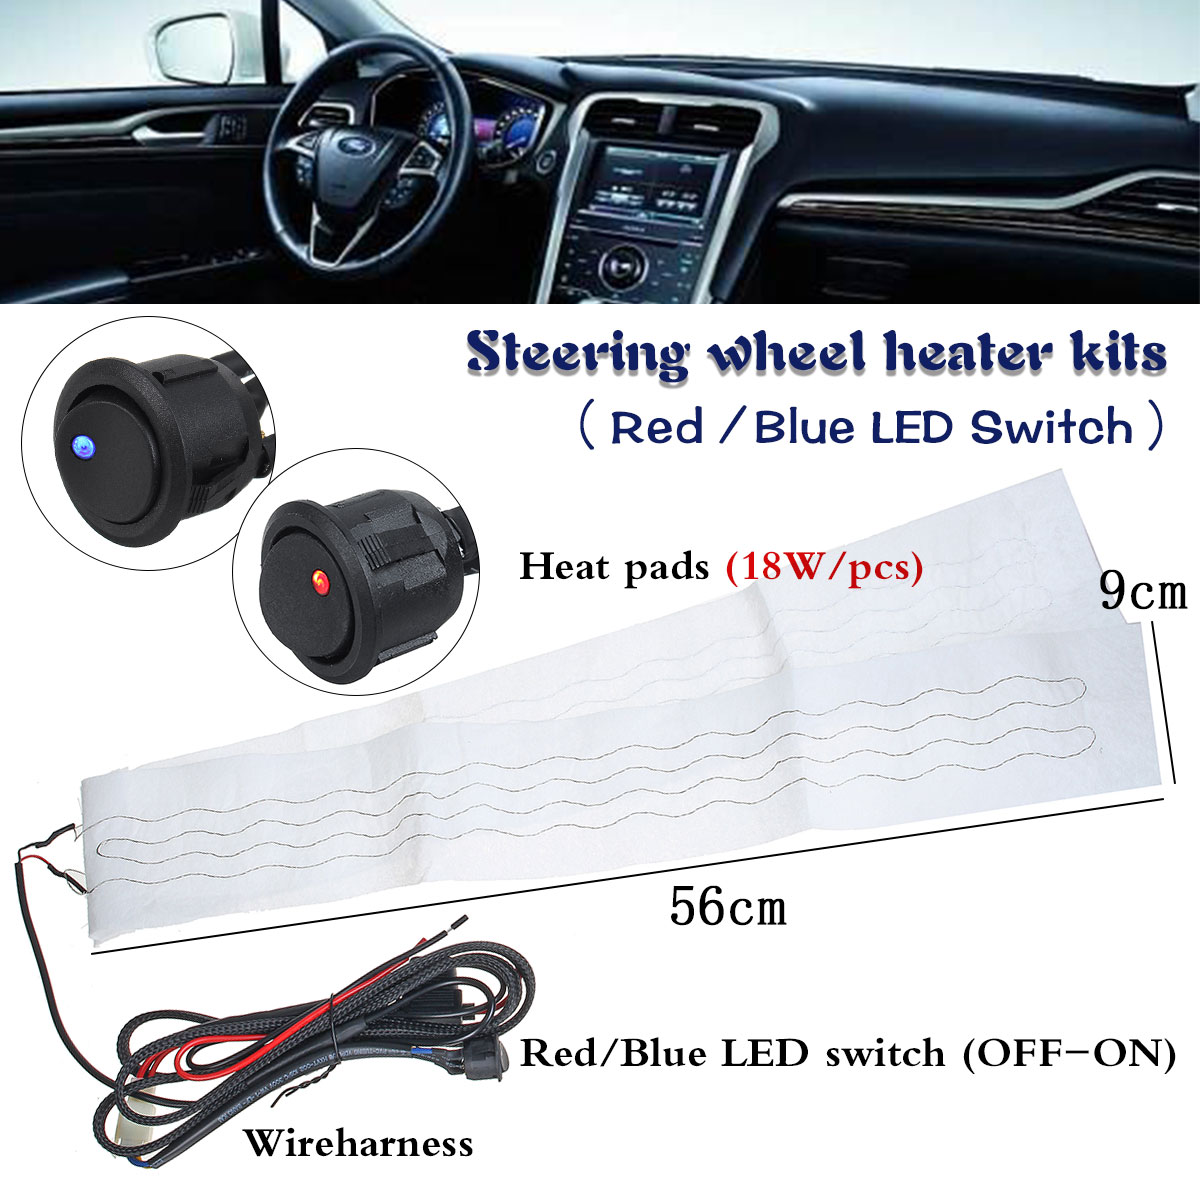 Universal Car Front Flocking Cloth Steering Wheel Heater Kits Car Heat Pads  Car Heater Blue/Red Light Switch 56cm x 9cm - Price history & Review